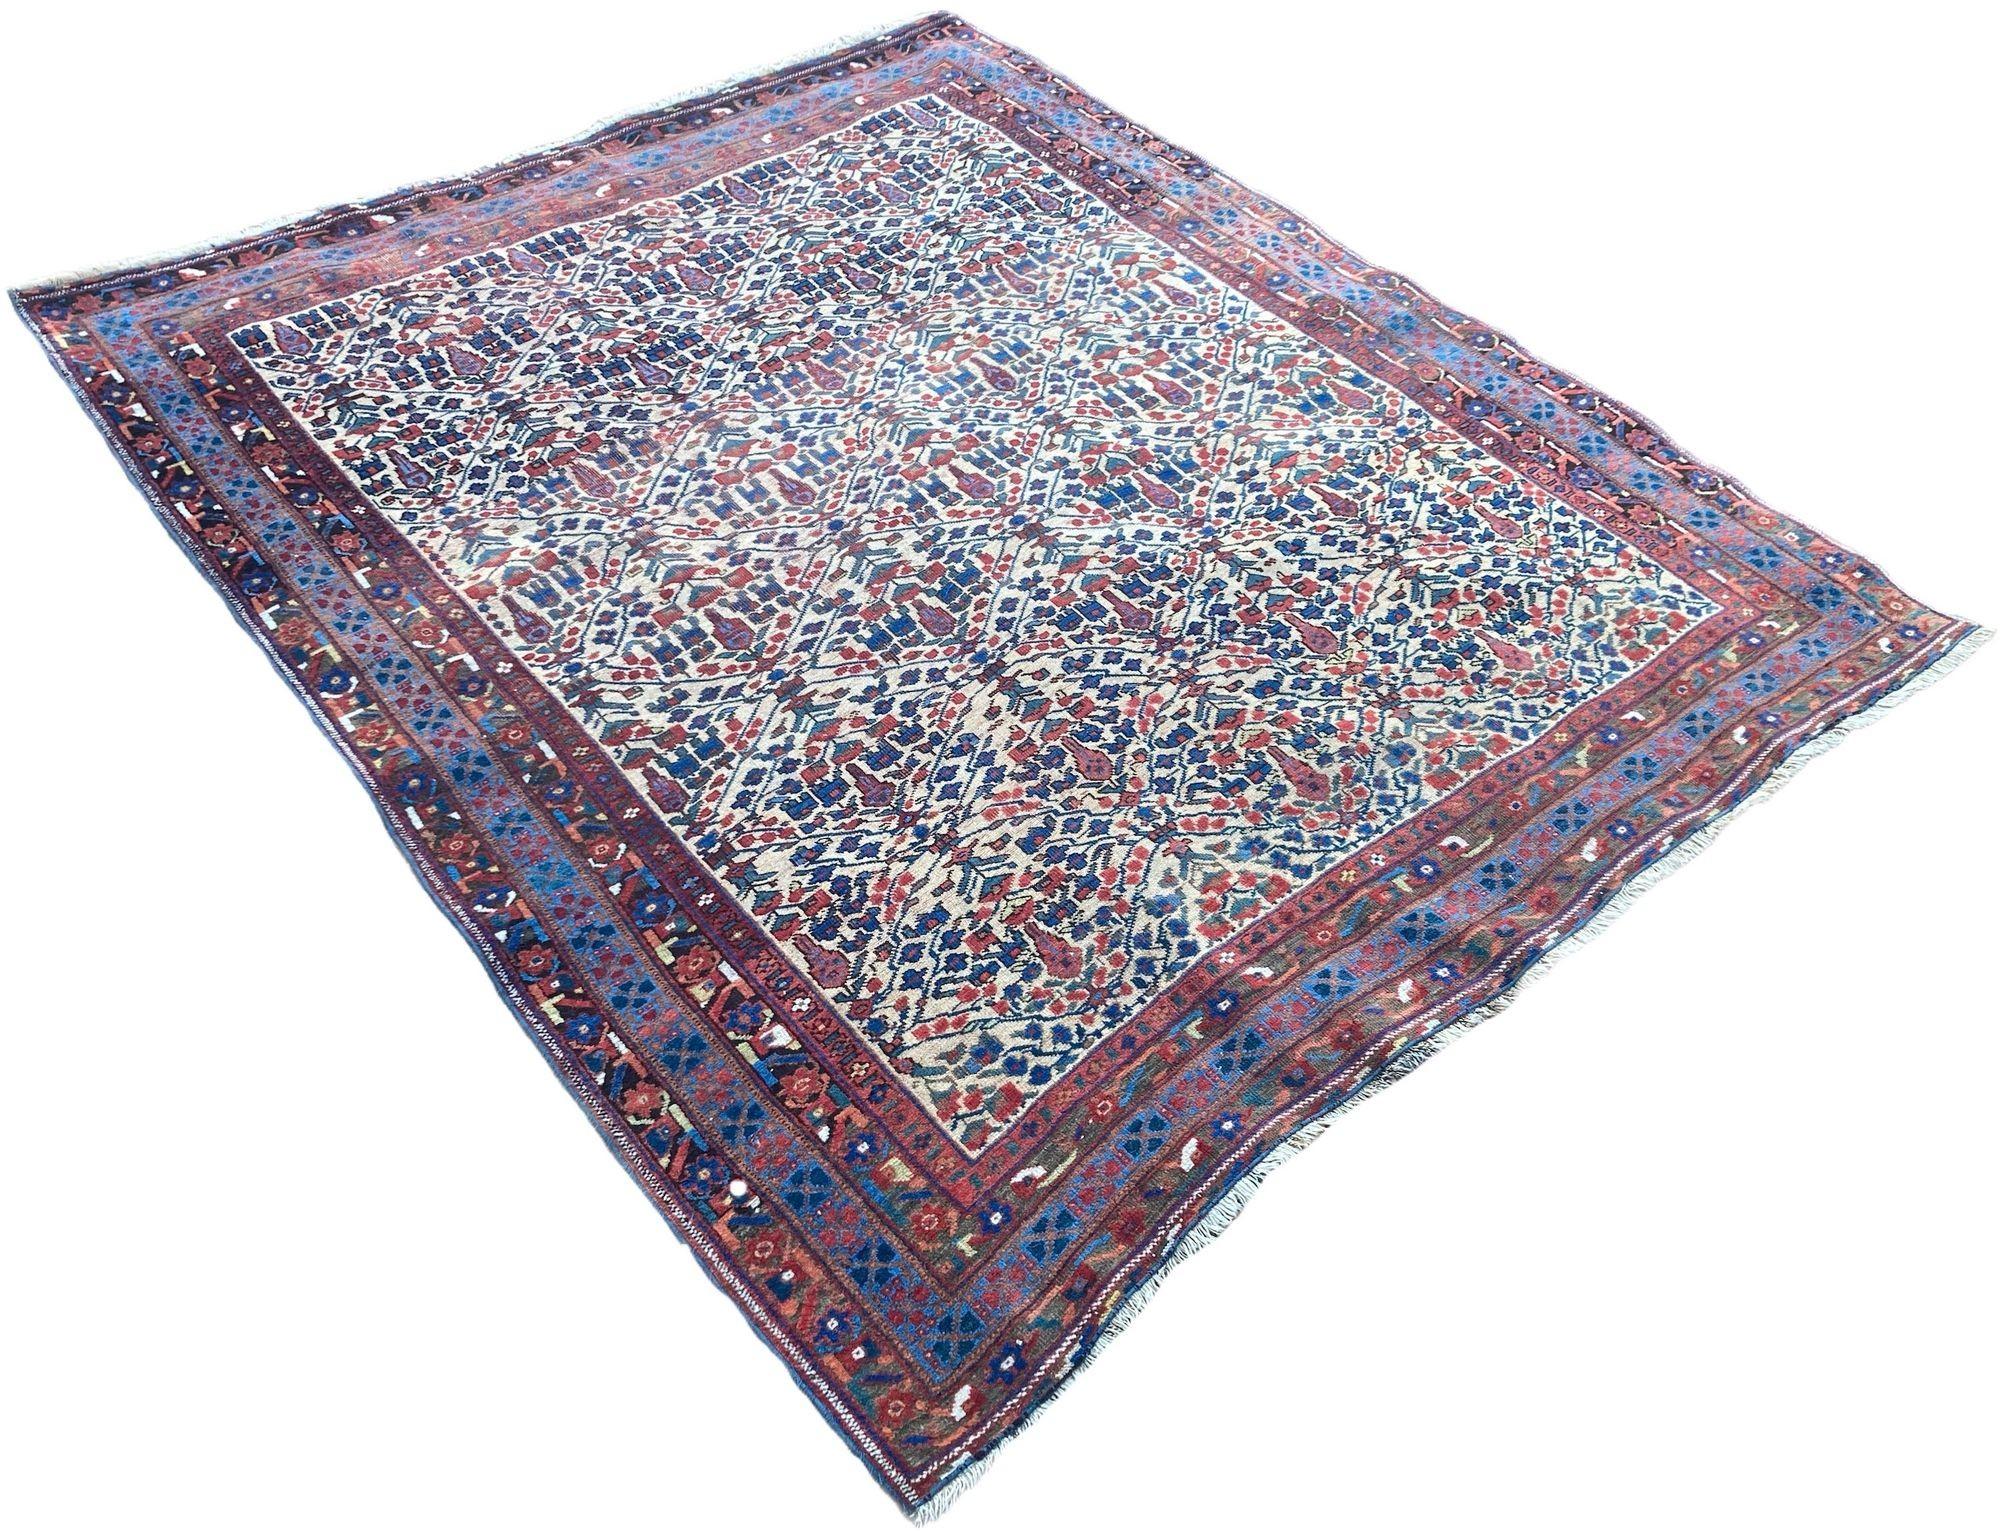 Antique Afshar Rug 1.90m x 1.56m In Good Condition For Sale In St. Albans, GB